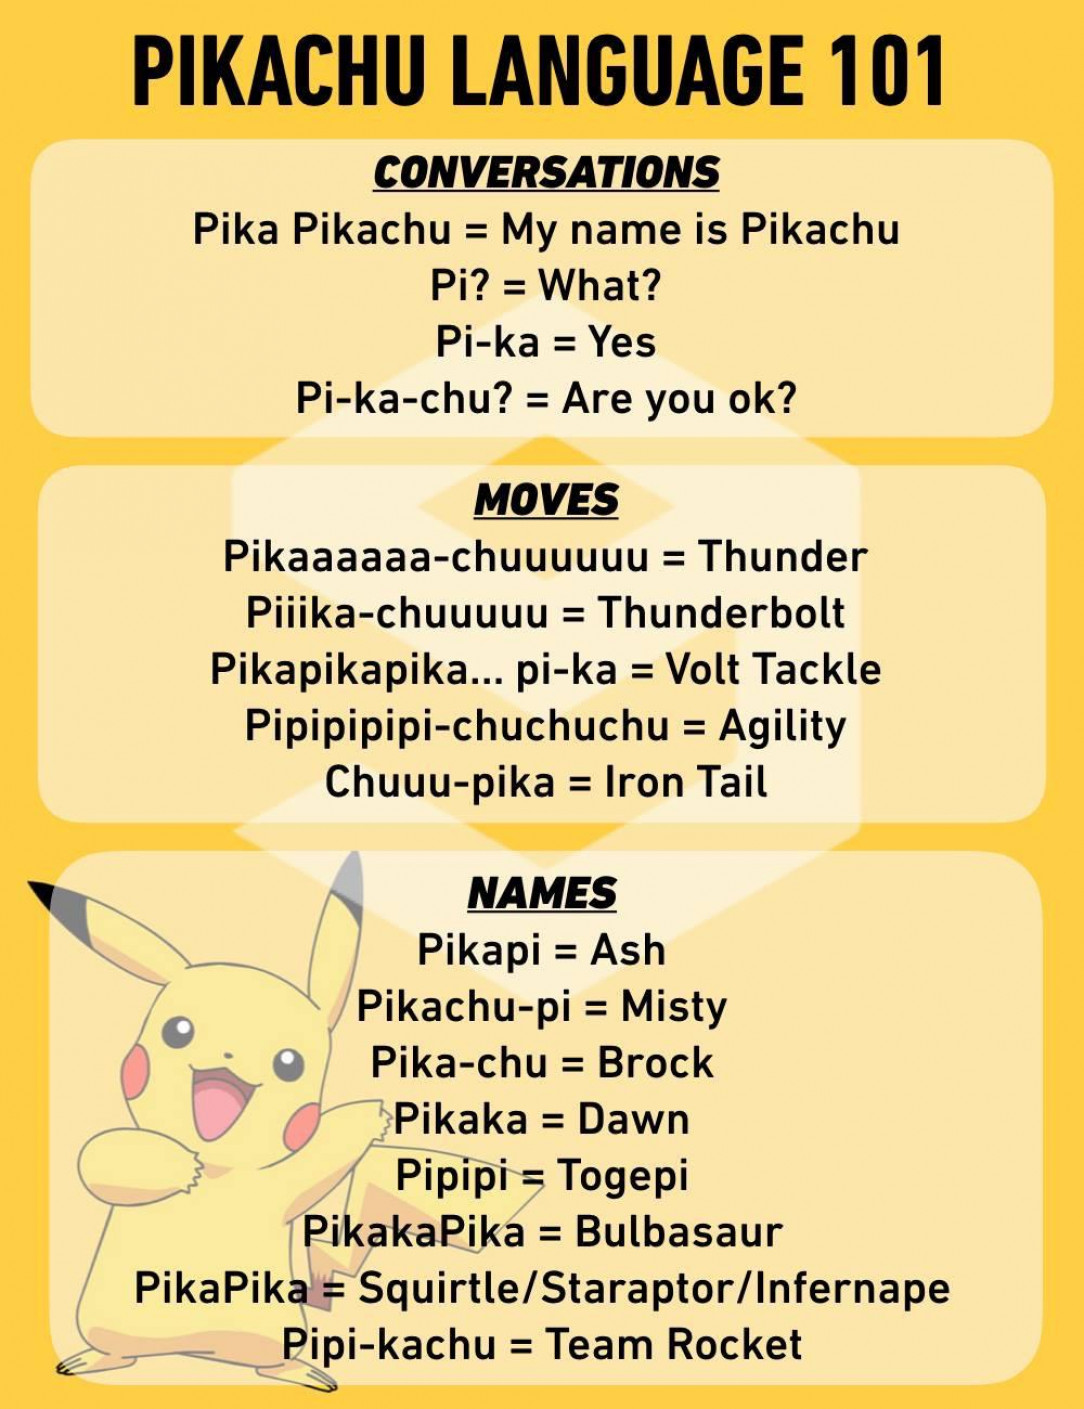 The language of Pikachu. Shoutout to all the Pokémon lovers!